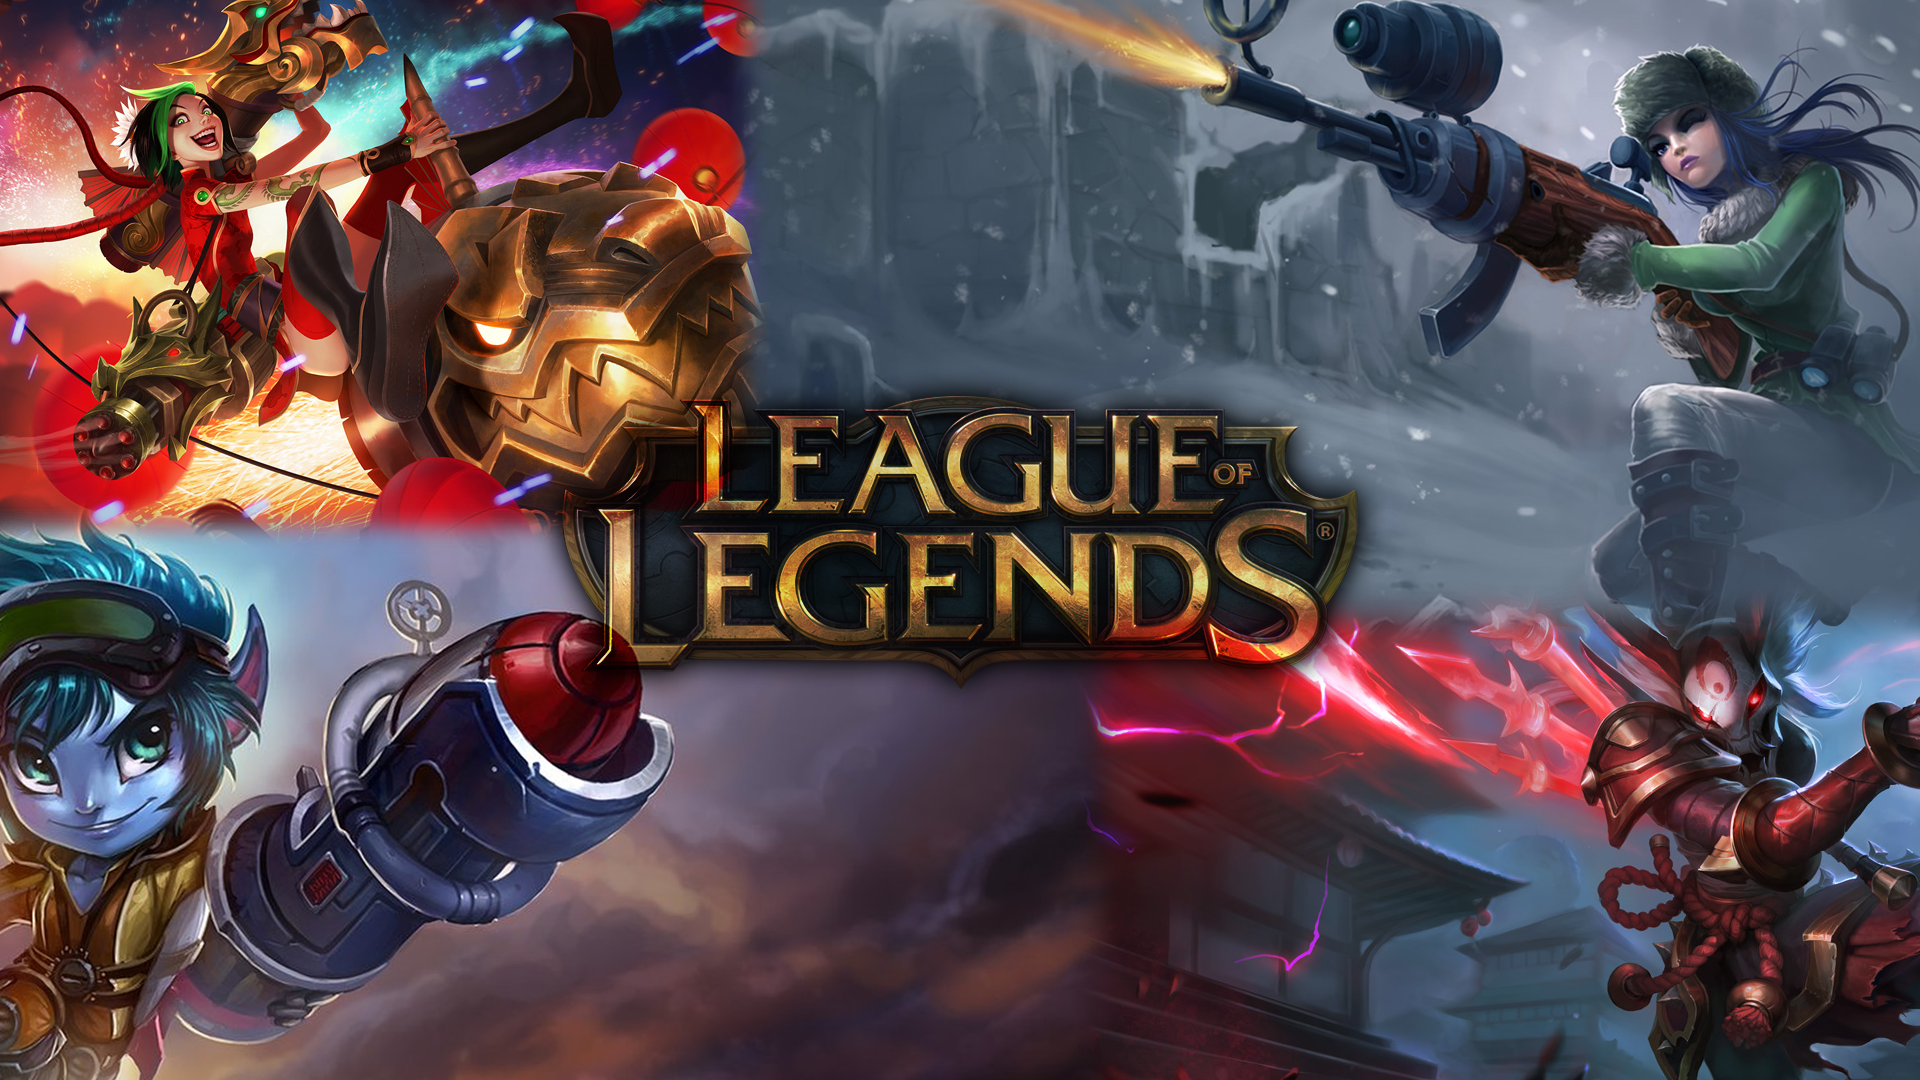 League Of Legends Jinx League Of Legends Caitlyn Tristana Kalista ADC Attack Damage Carry Video Game 1920x1080